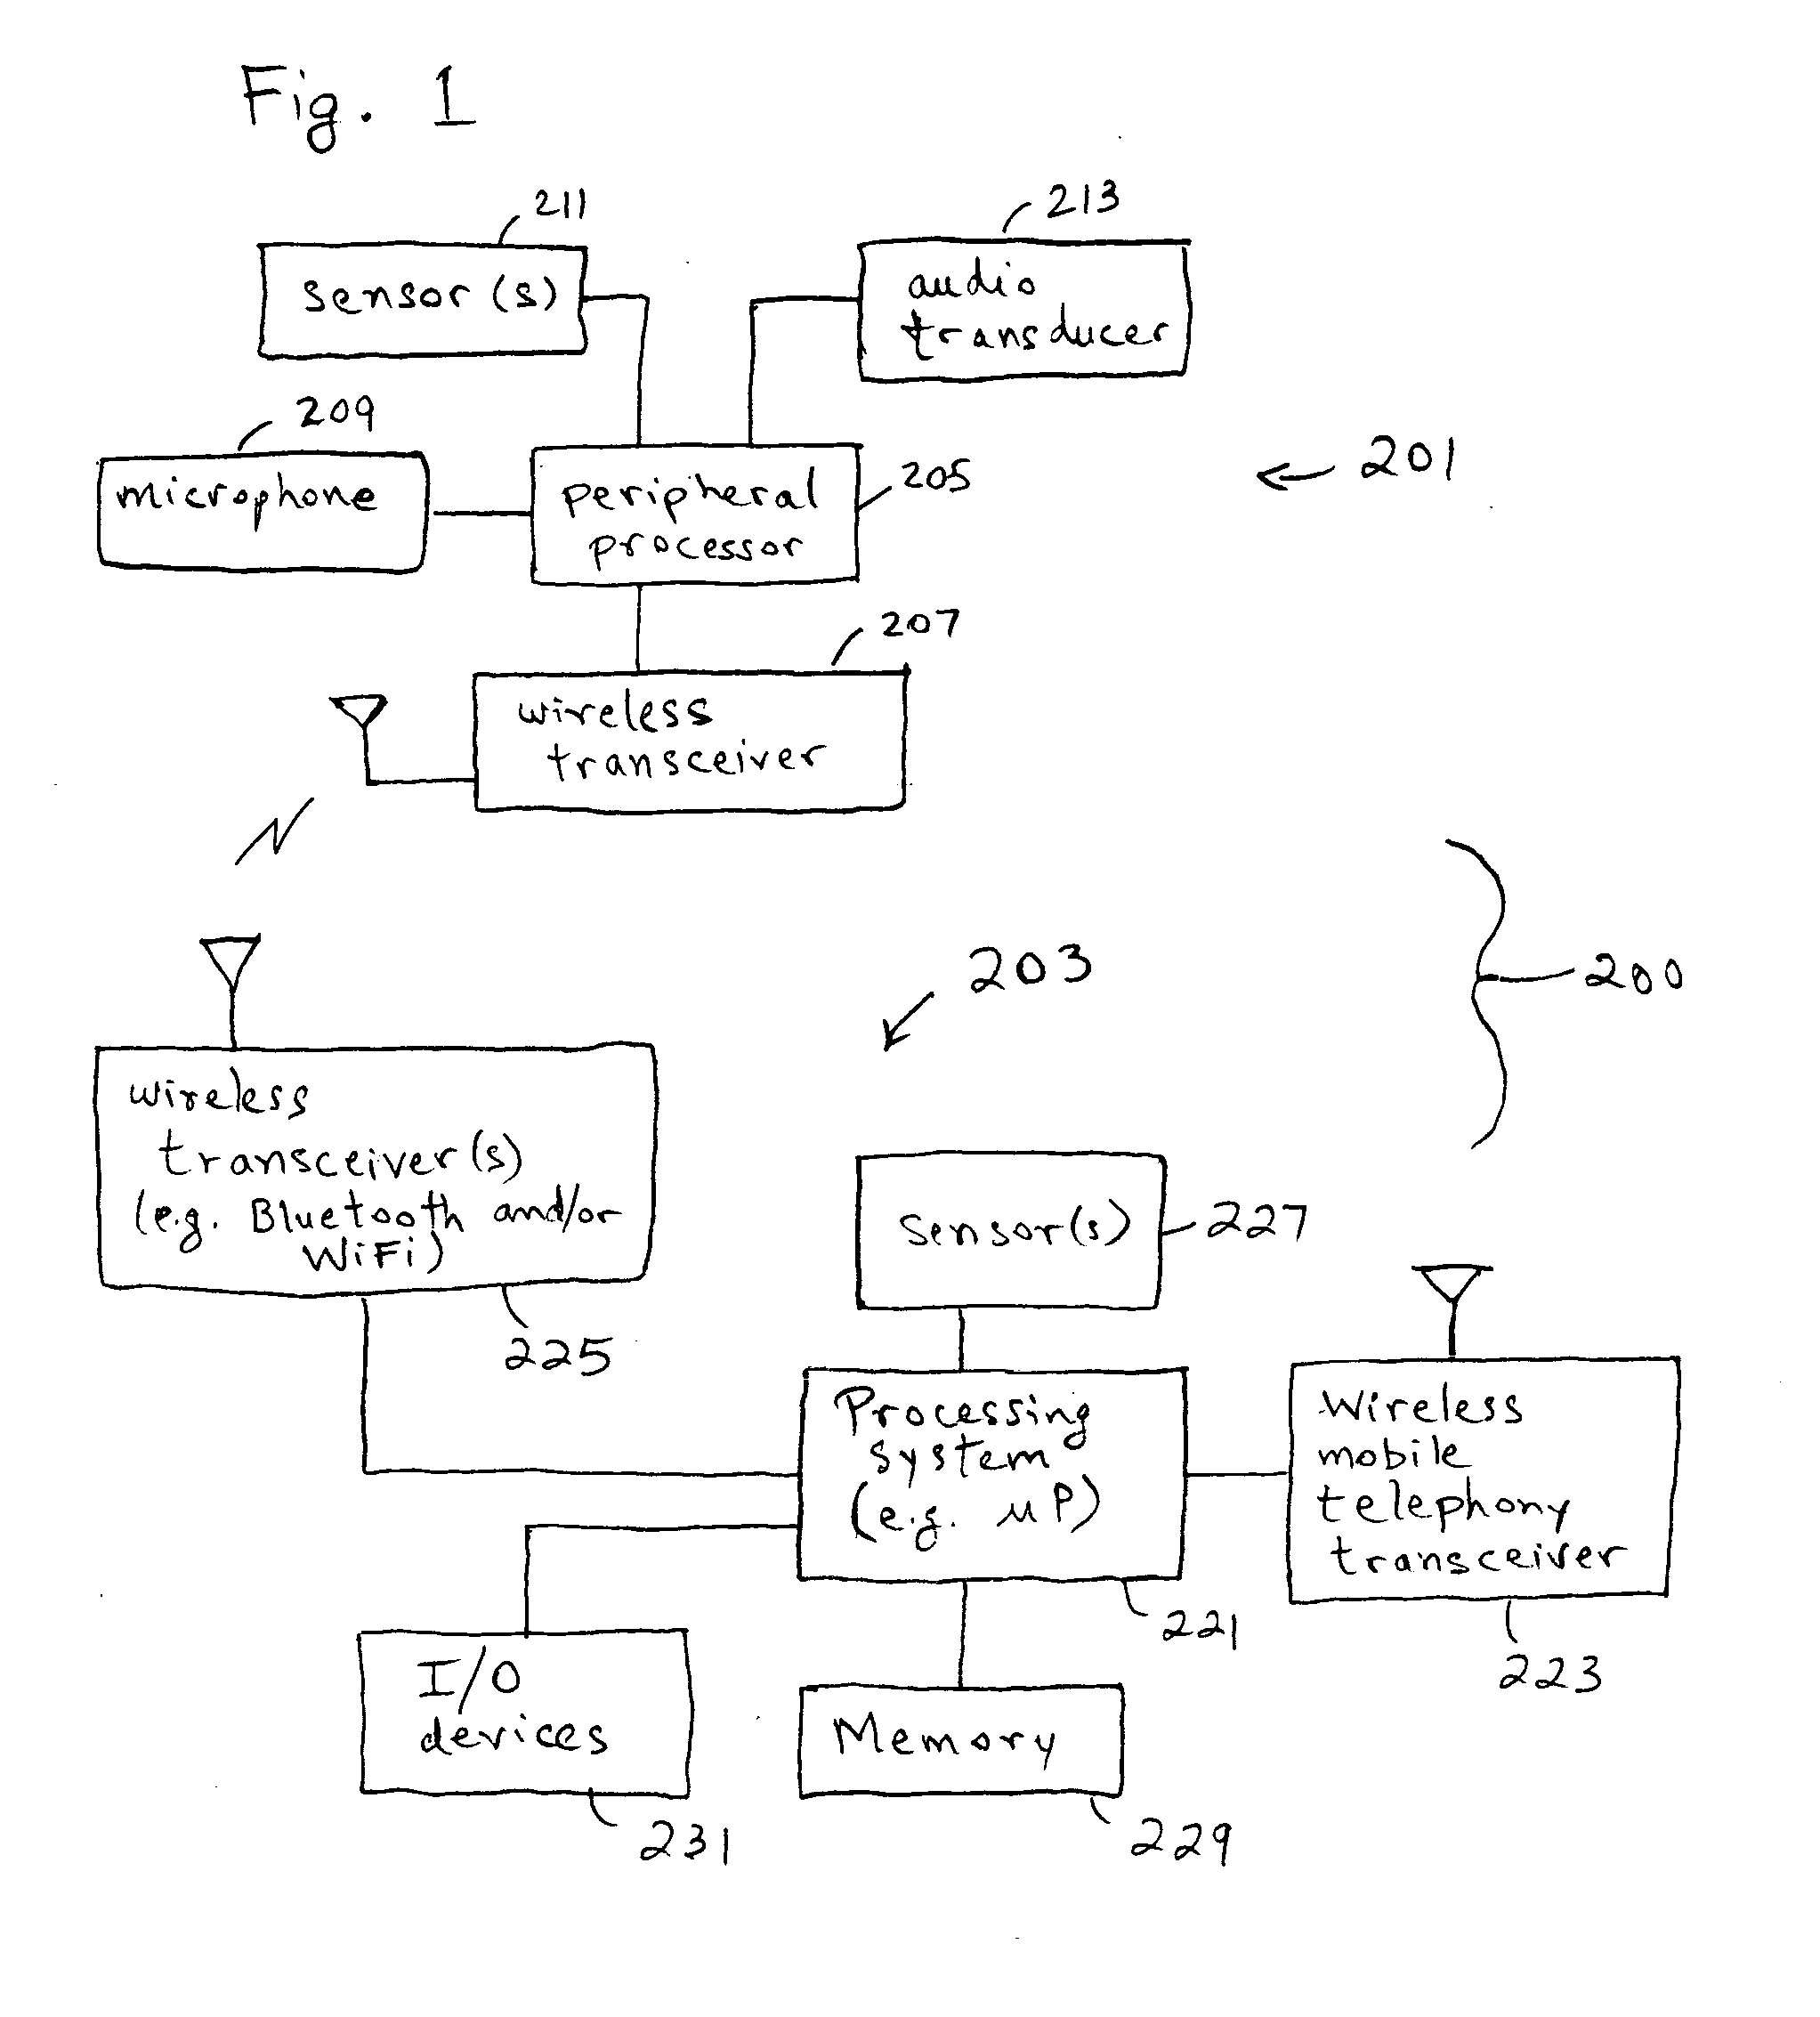 Methods and systems for automatic configuration of peripherals